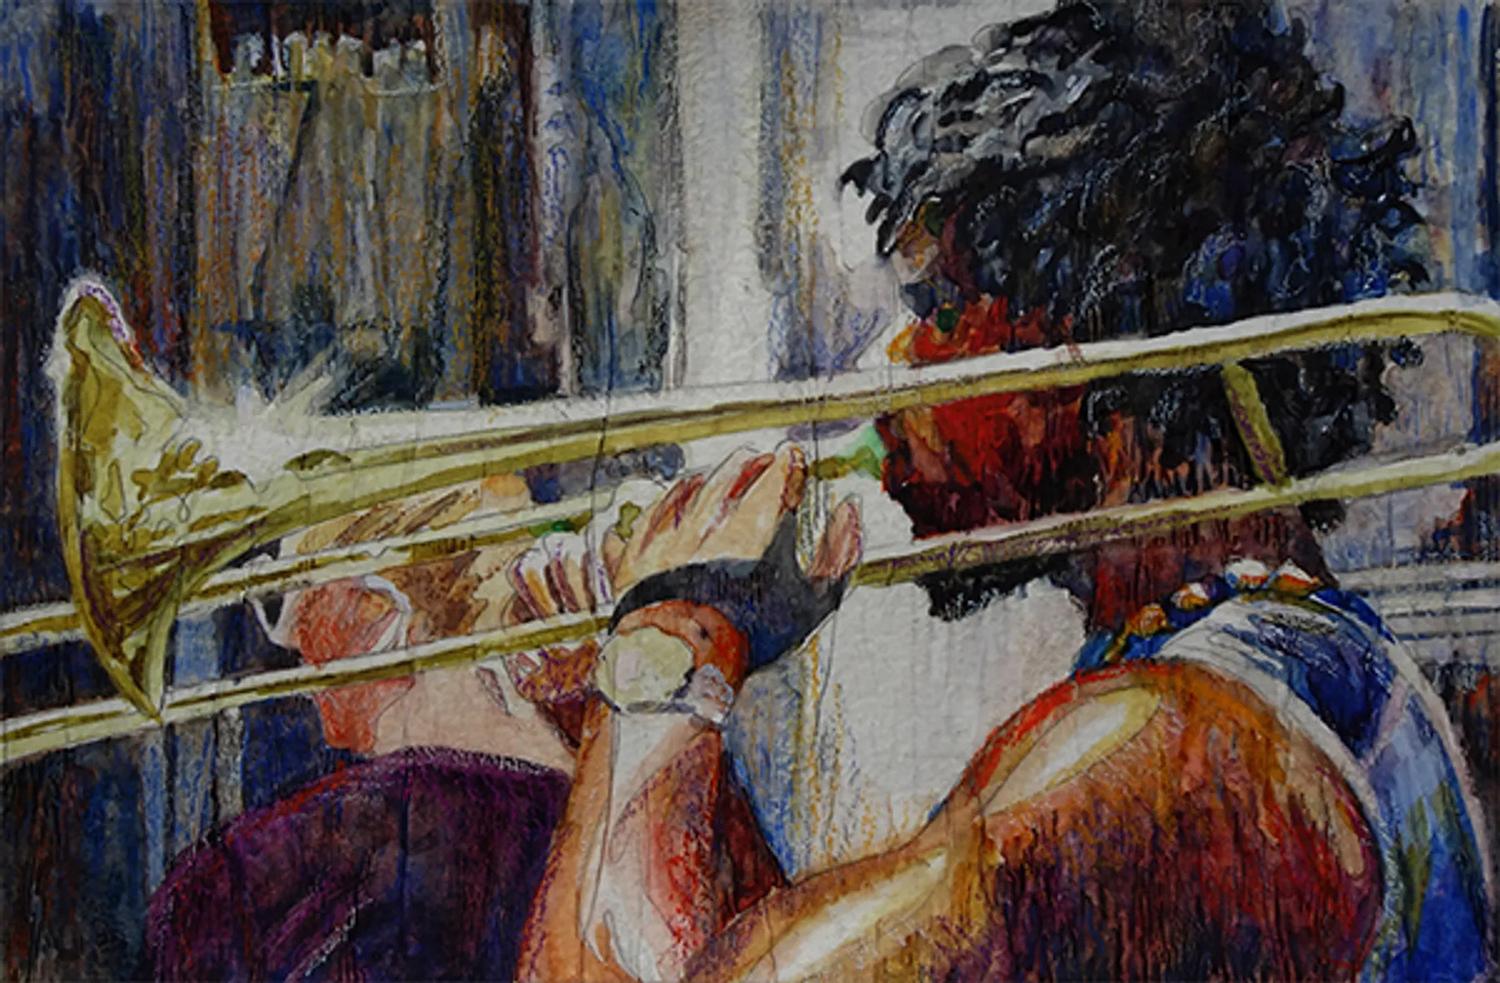 A watercolor painting from The San Diego Watercolor Society Gallery featuring artwork of a trombone player 